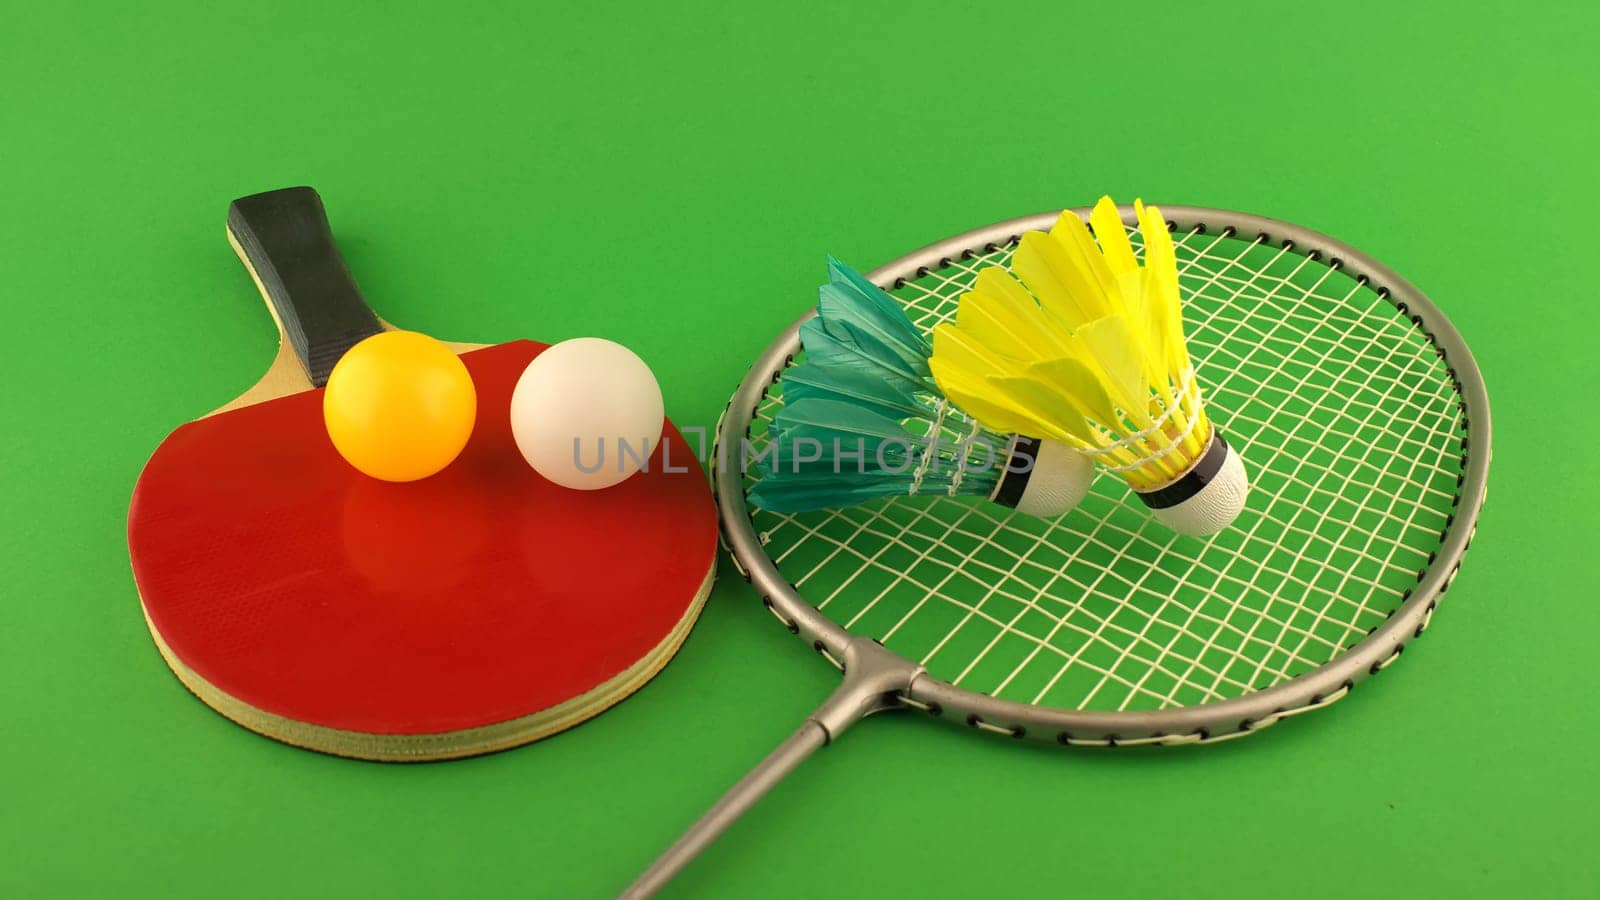 Table tennis racket with a yellow ball and a white ball on it and badminton racket with a feather shuttlecock on clear green background